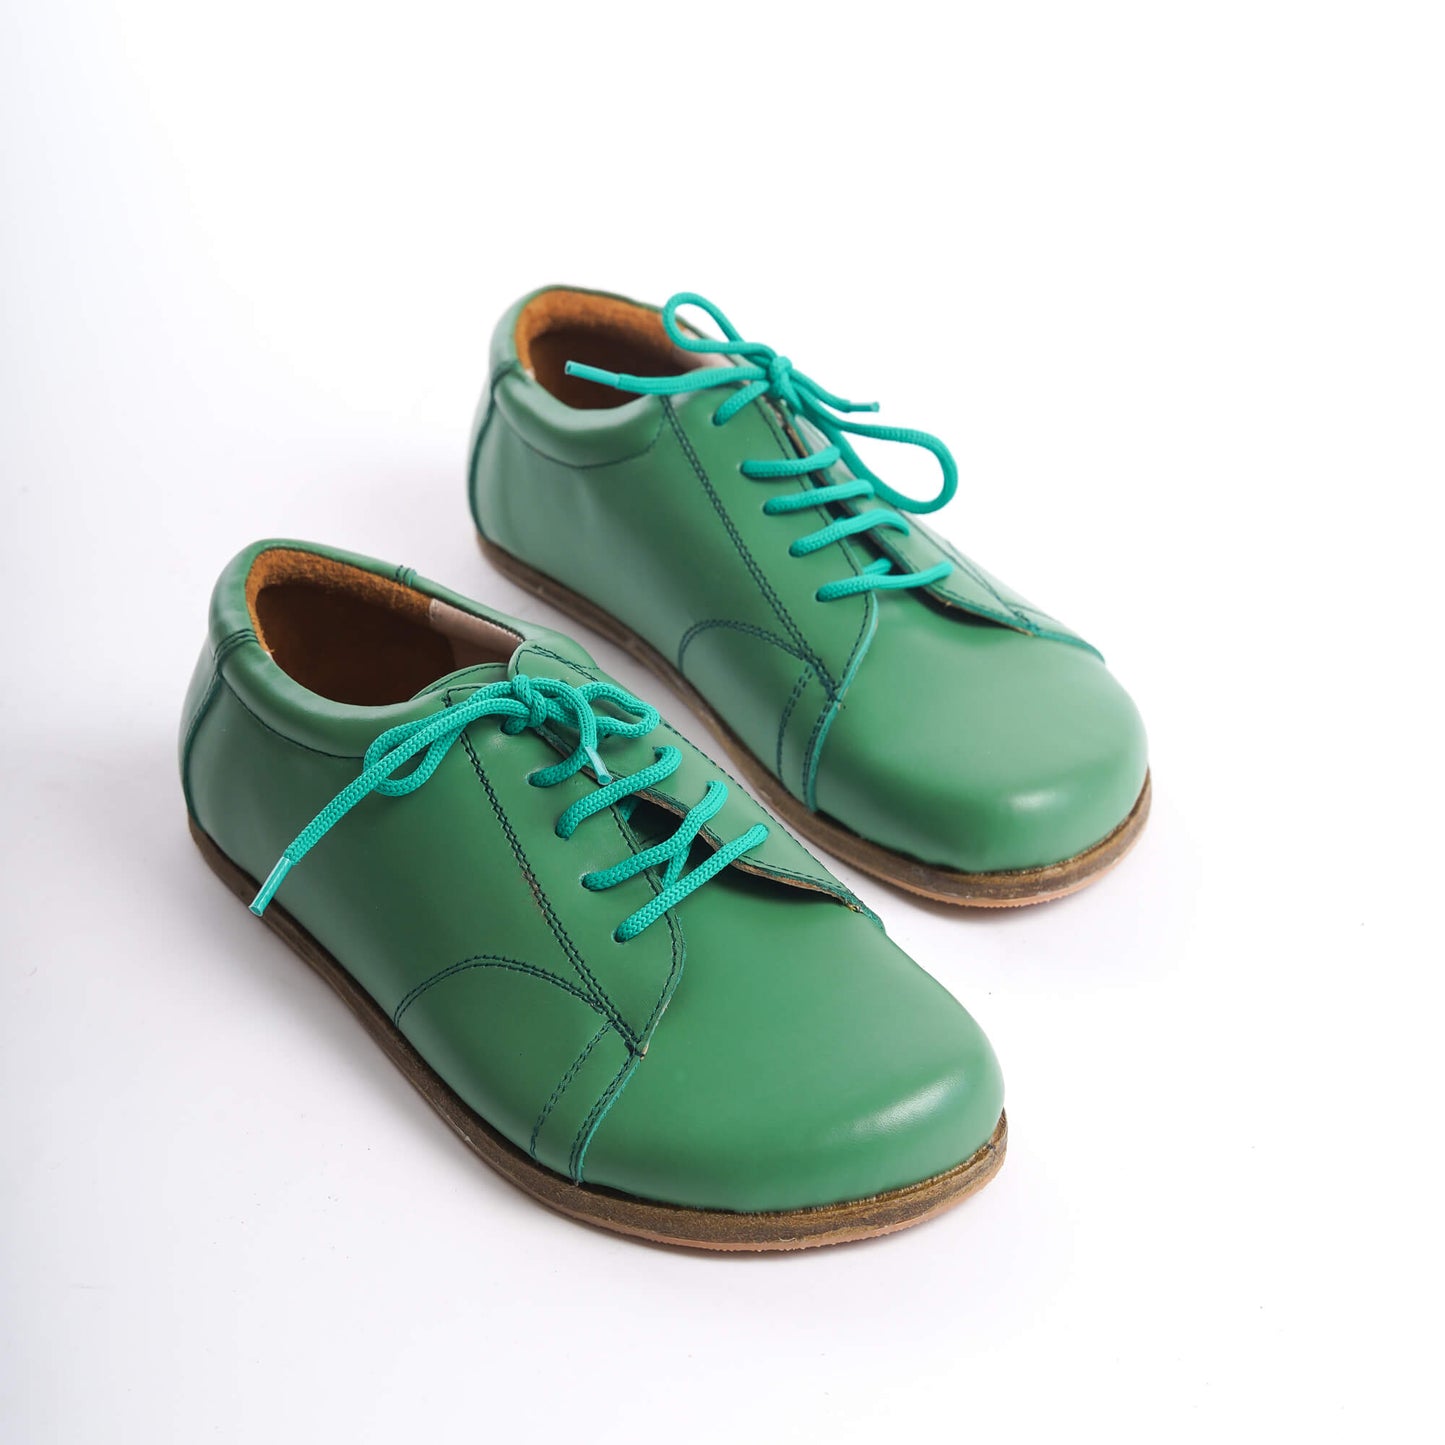 Pair of Lydia Leather Barefoot Women Sneakers in green with turquoise laces, showcasing a stylish and natural design.